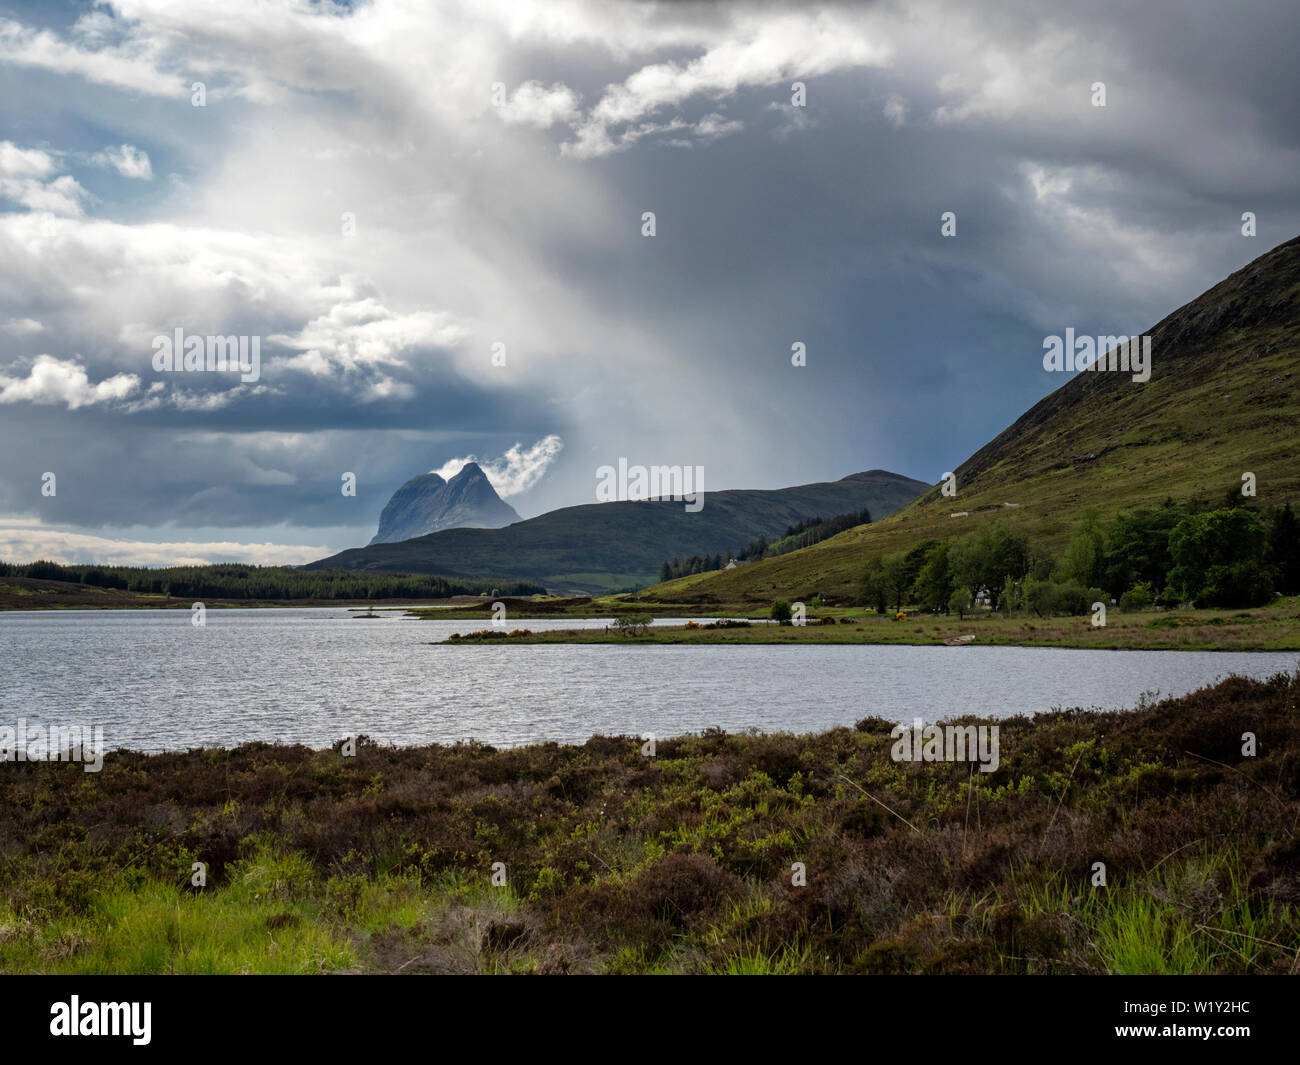 Suilven (731m), a mountain in the remote Scottish area of western Sutherland, is seen across Loch Borralan Stock Photo